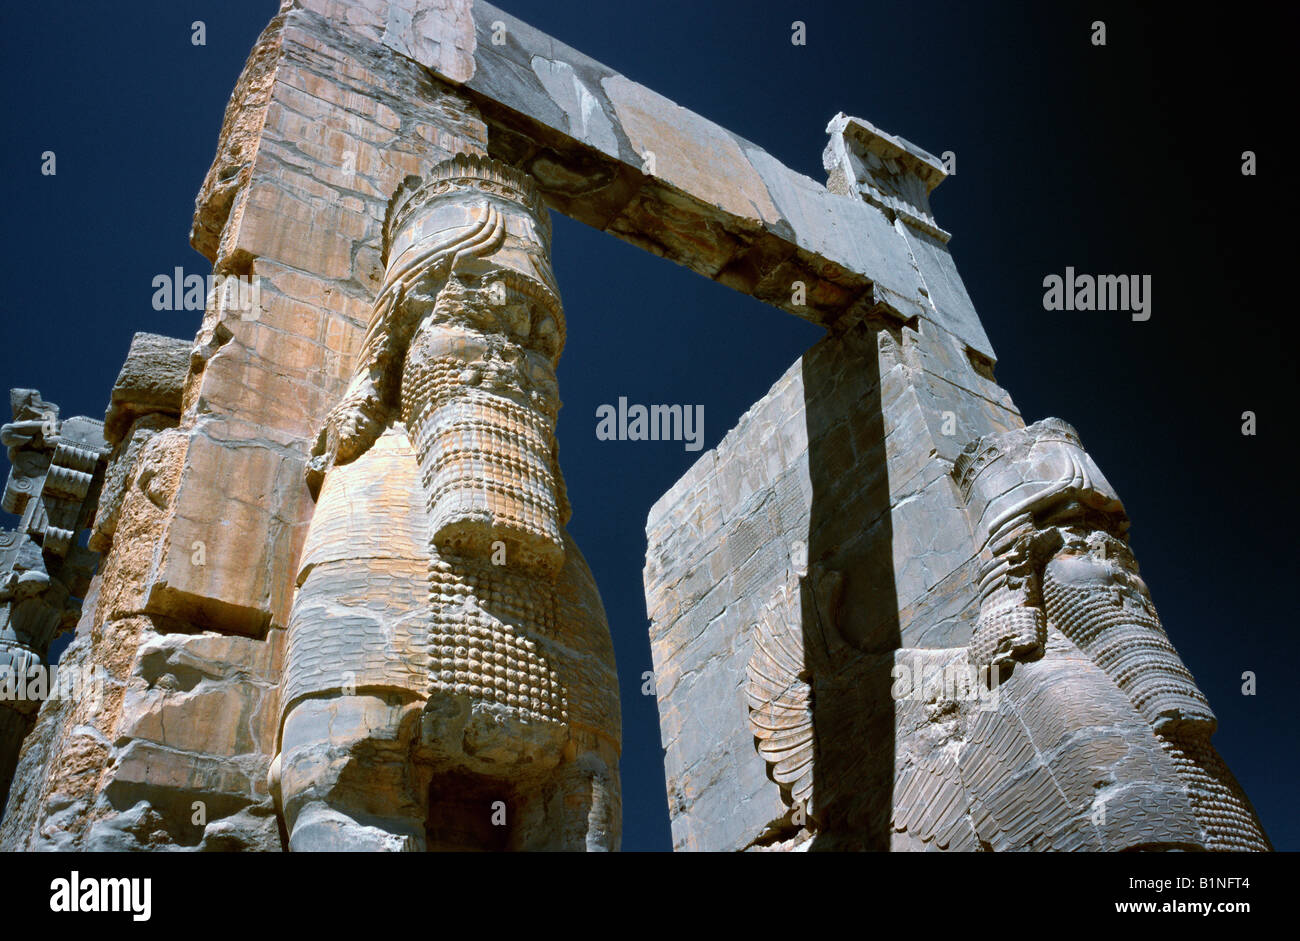 April 14, 2006 - The Gate of All Nations at the ancient ruins of Persepolis near the Iranian city of Shiraz. Stock Photo